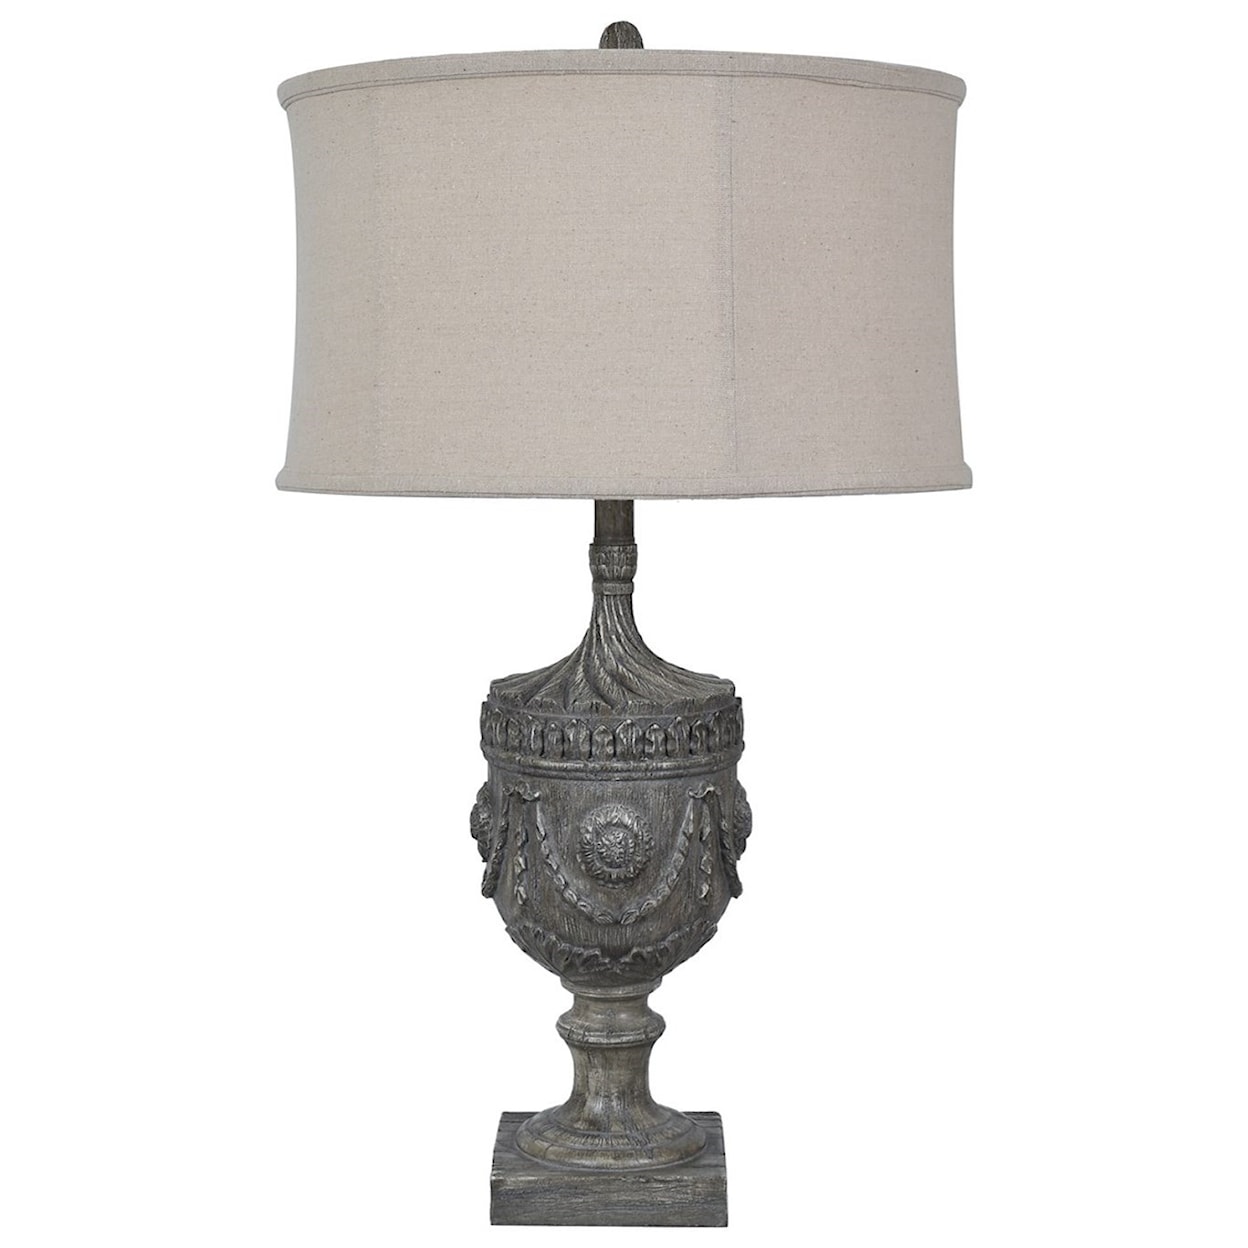 Crestview Collection Lighting Morgan Table Lamp